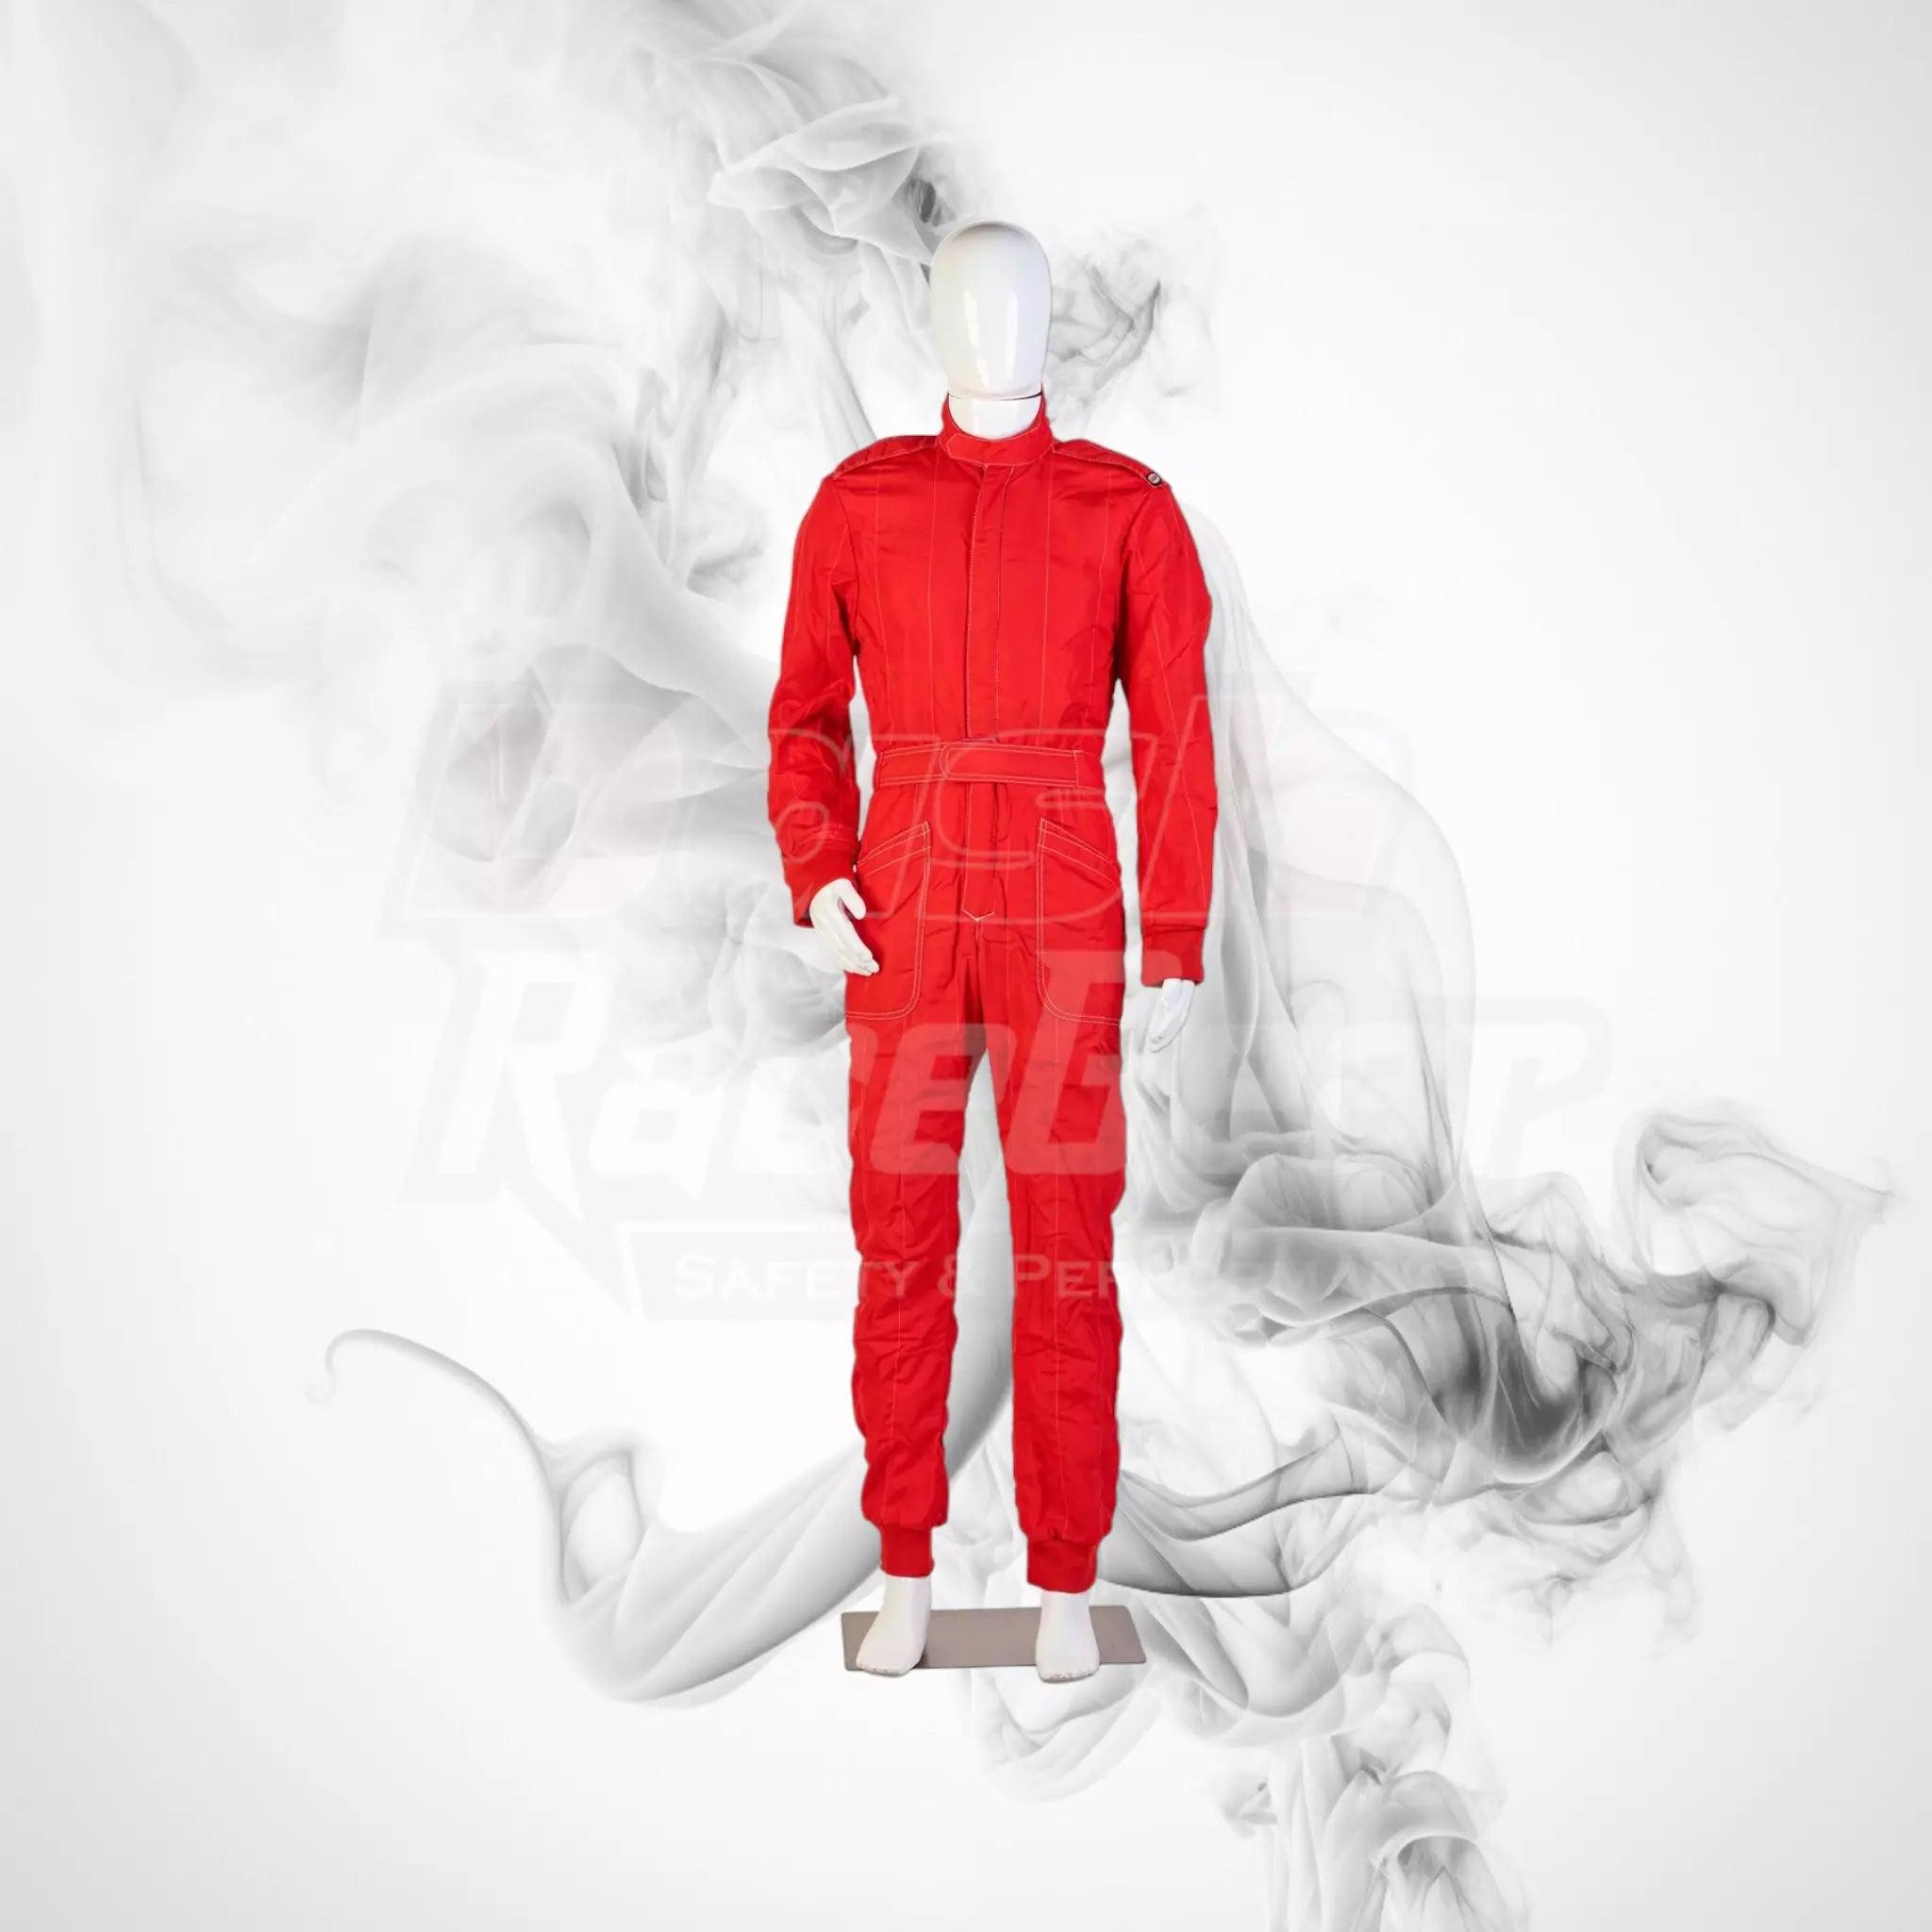 Stand 21 LeConte NIGEL MANSELL’S Red Race Suit - Dash Racegear 